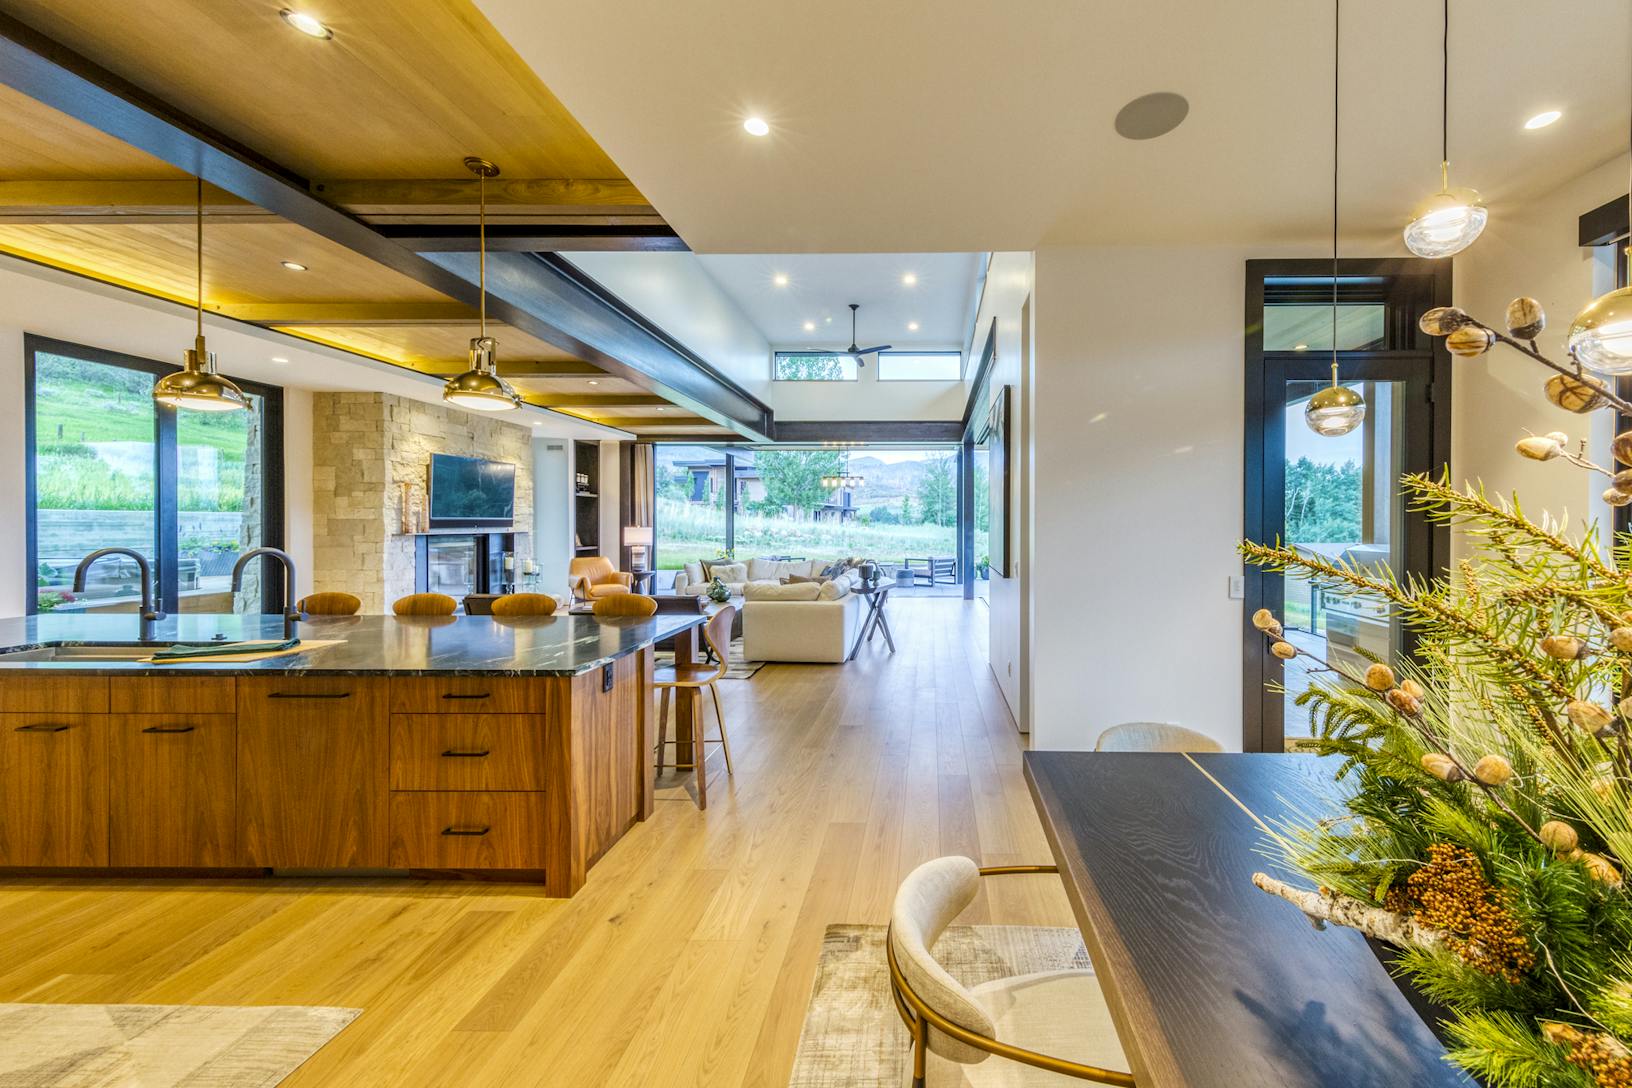 A modern kitchen with wood floors and a dining table- sliding doors